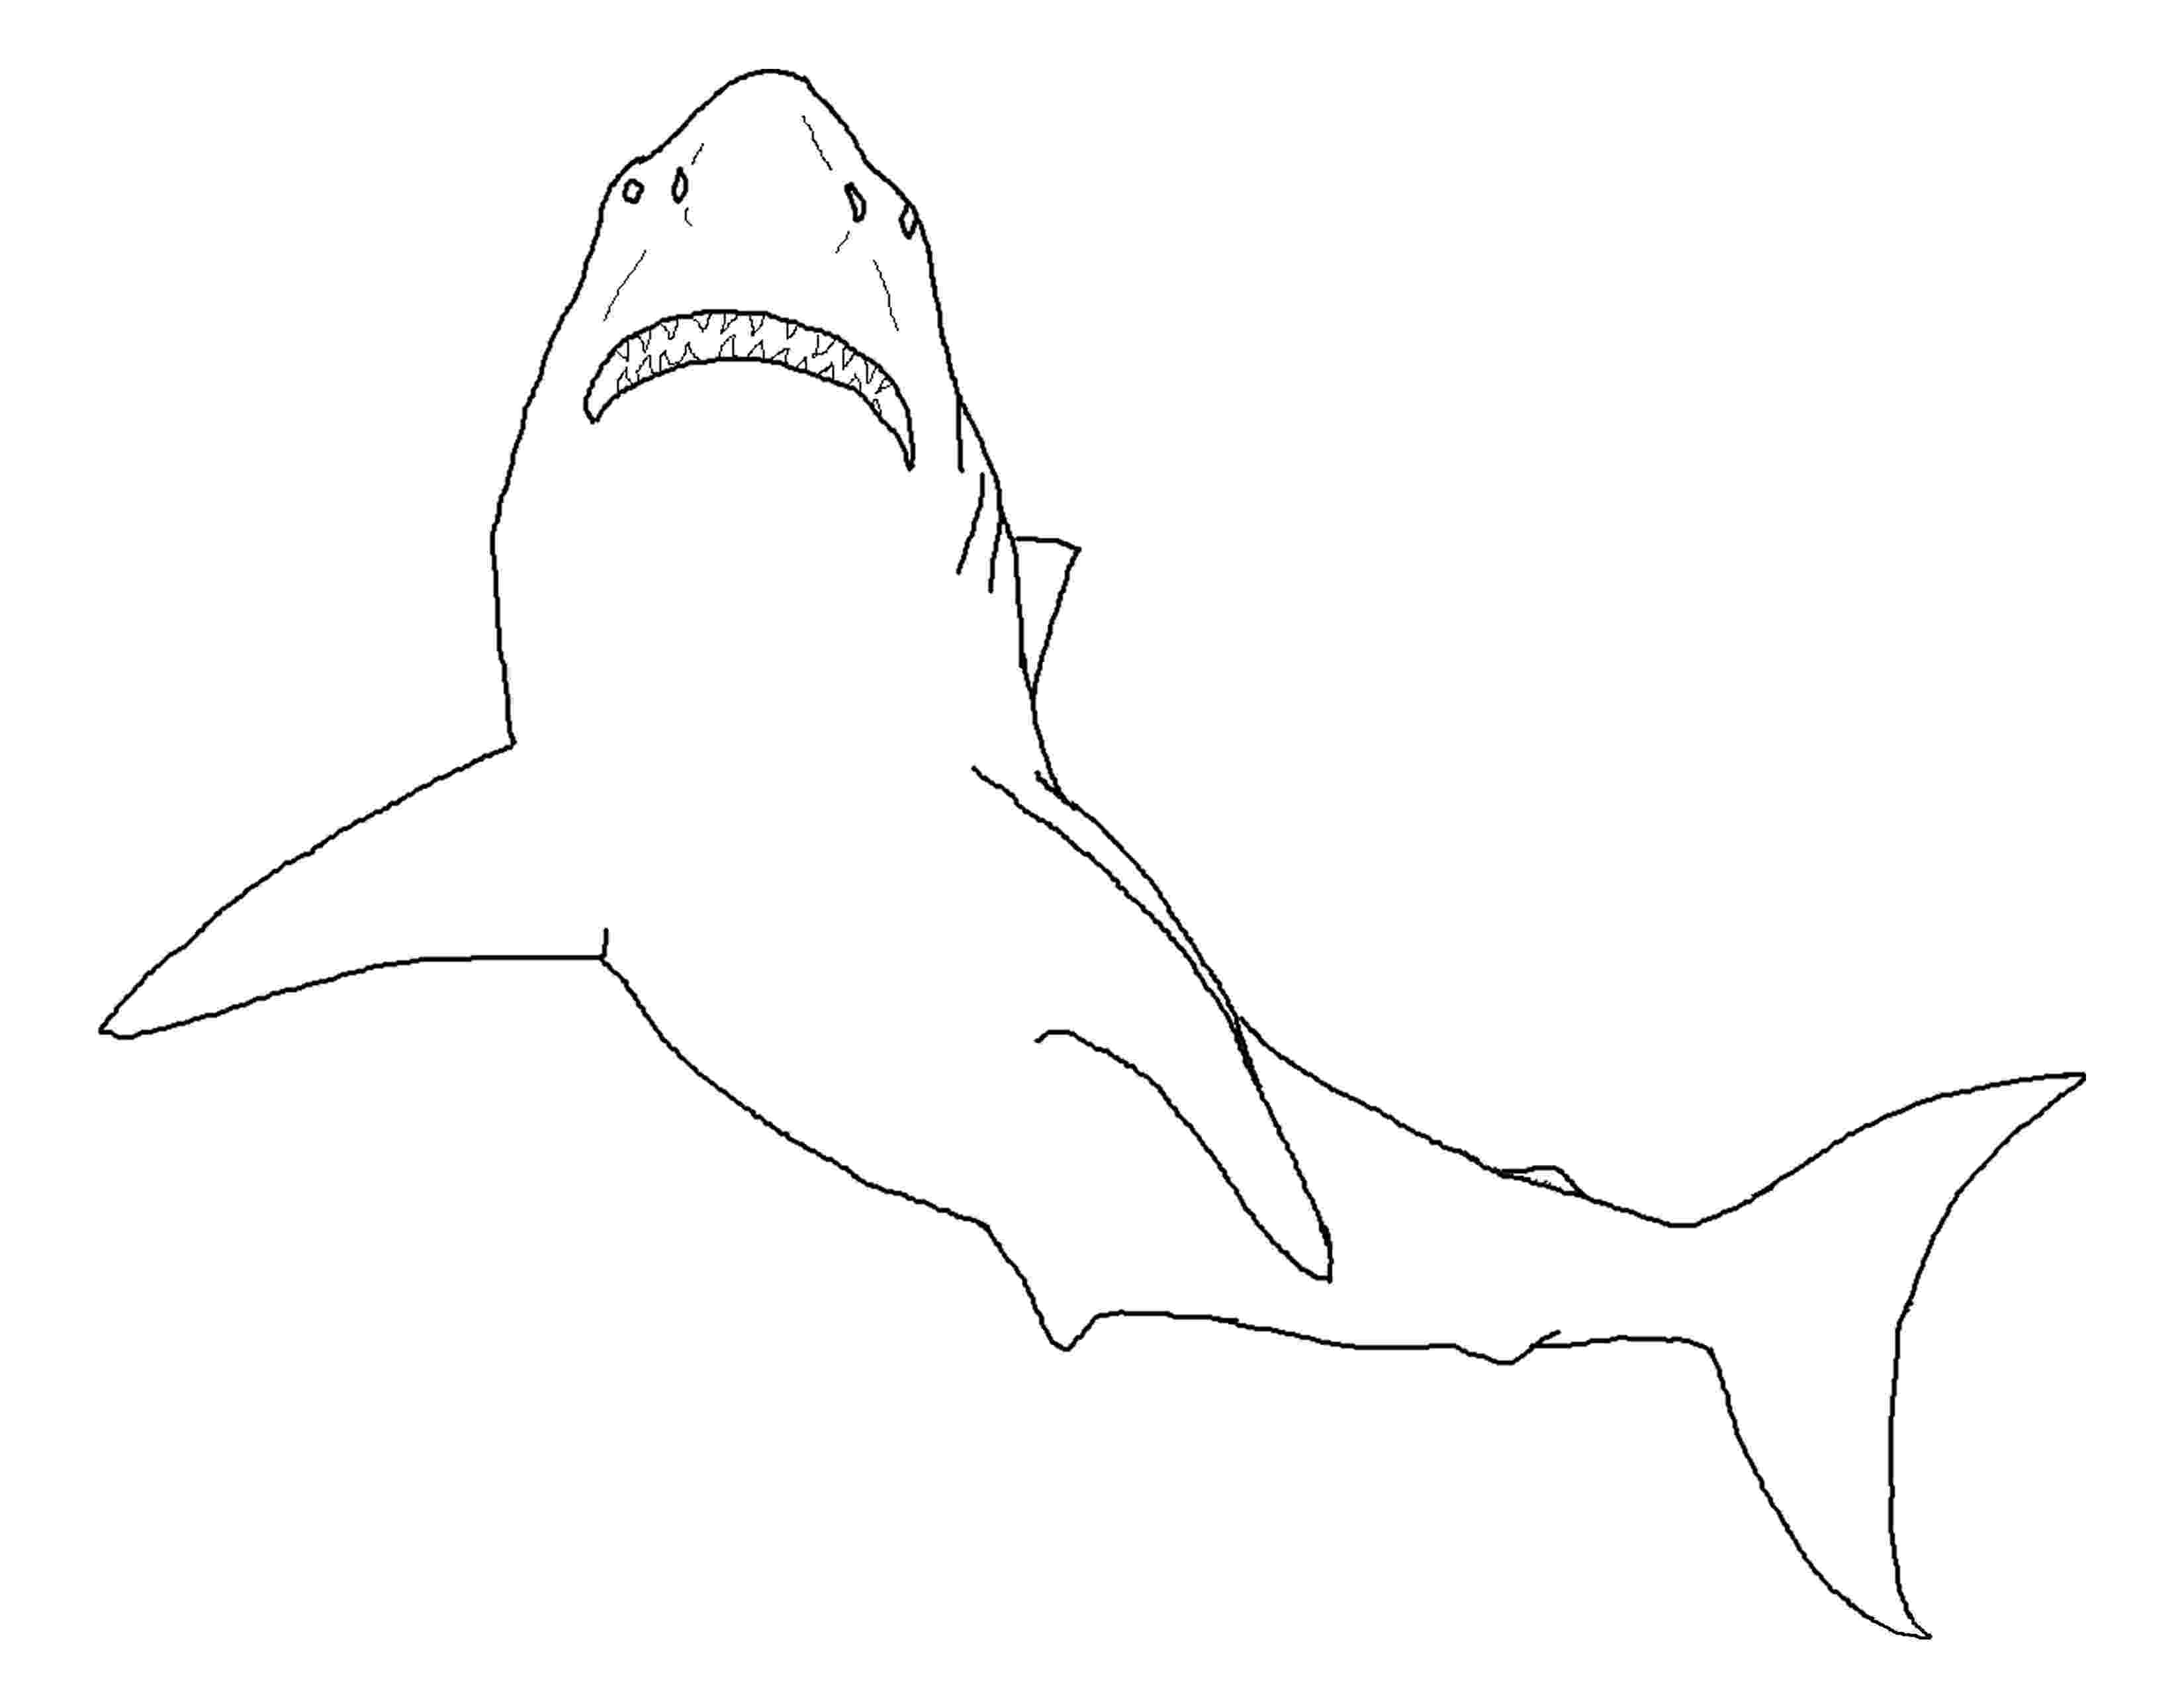 great white shark coloring pictures great white shark coloring pages to download and print for pictures shark white great coloring 